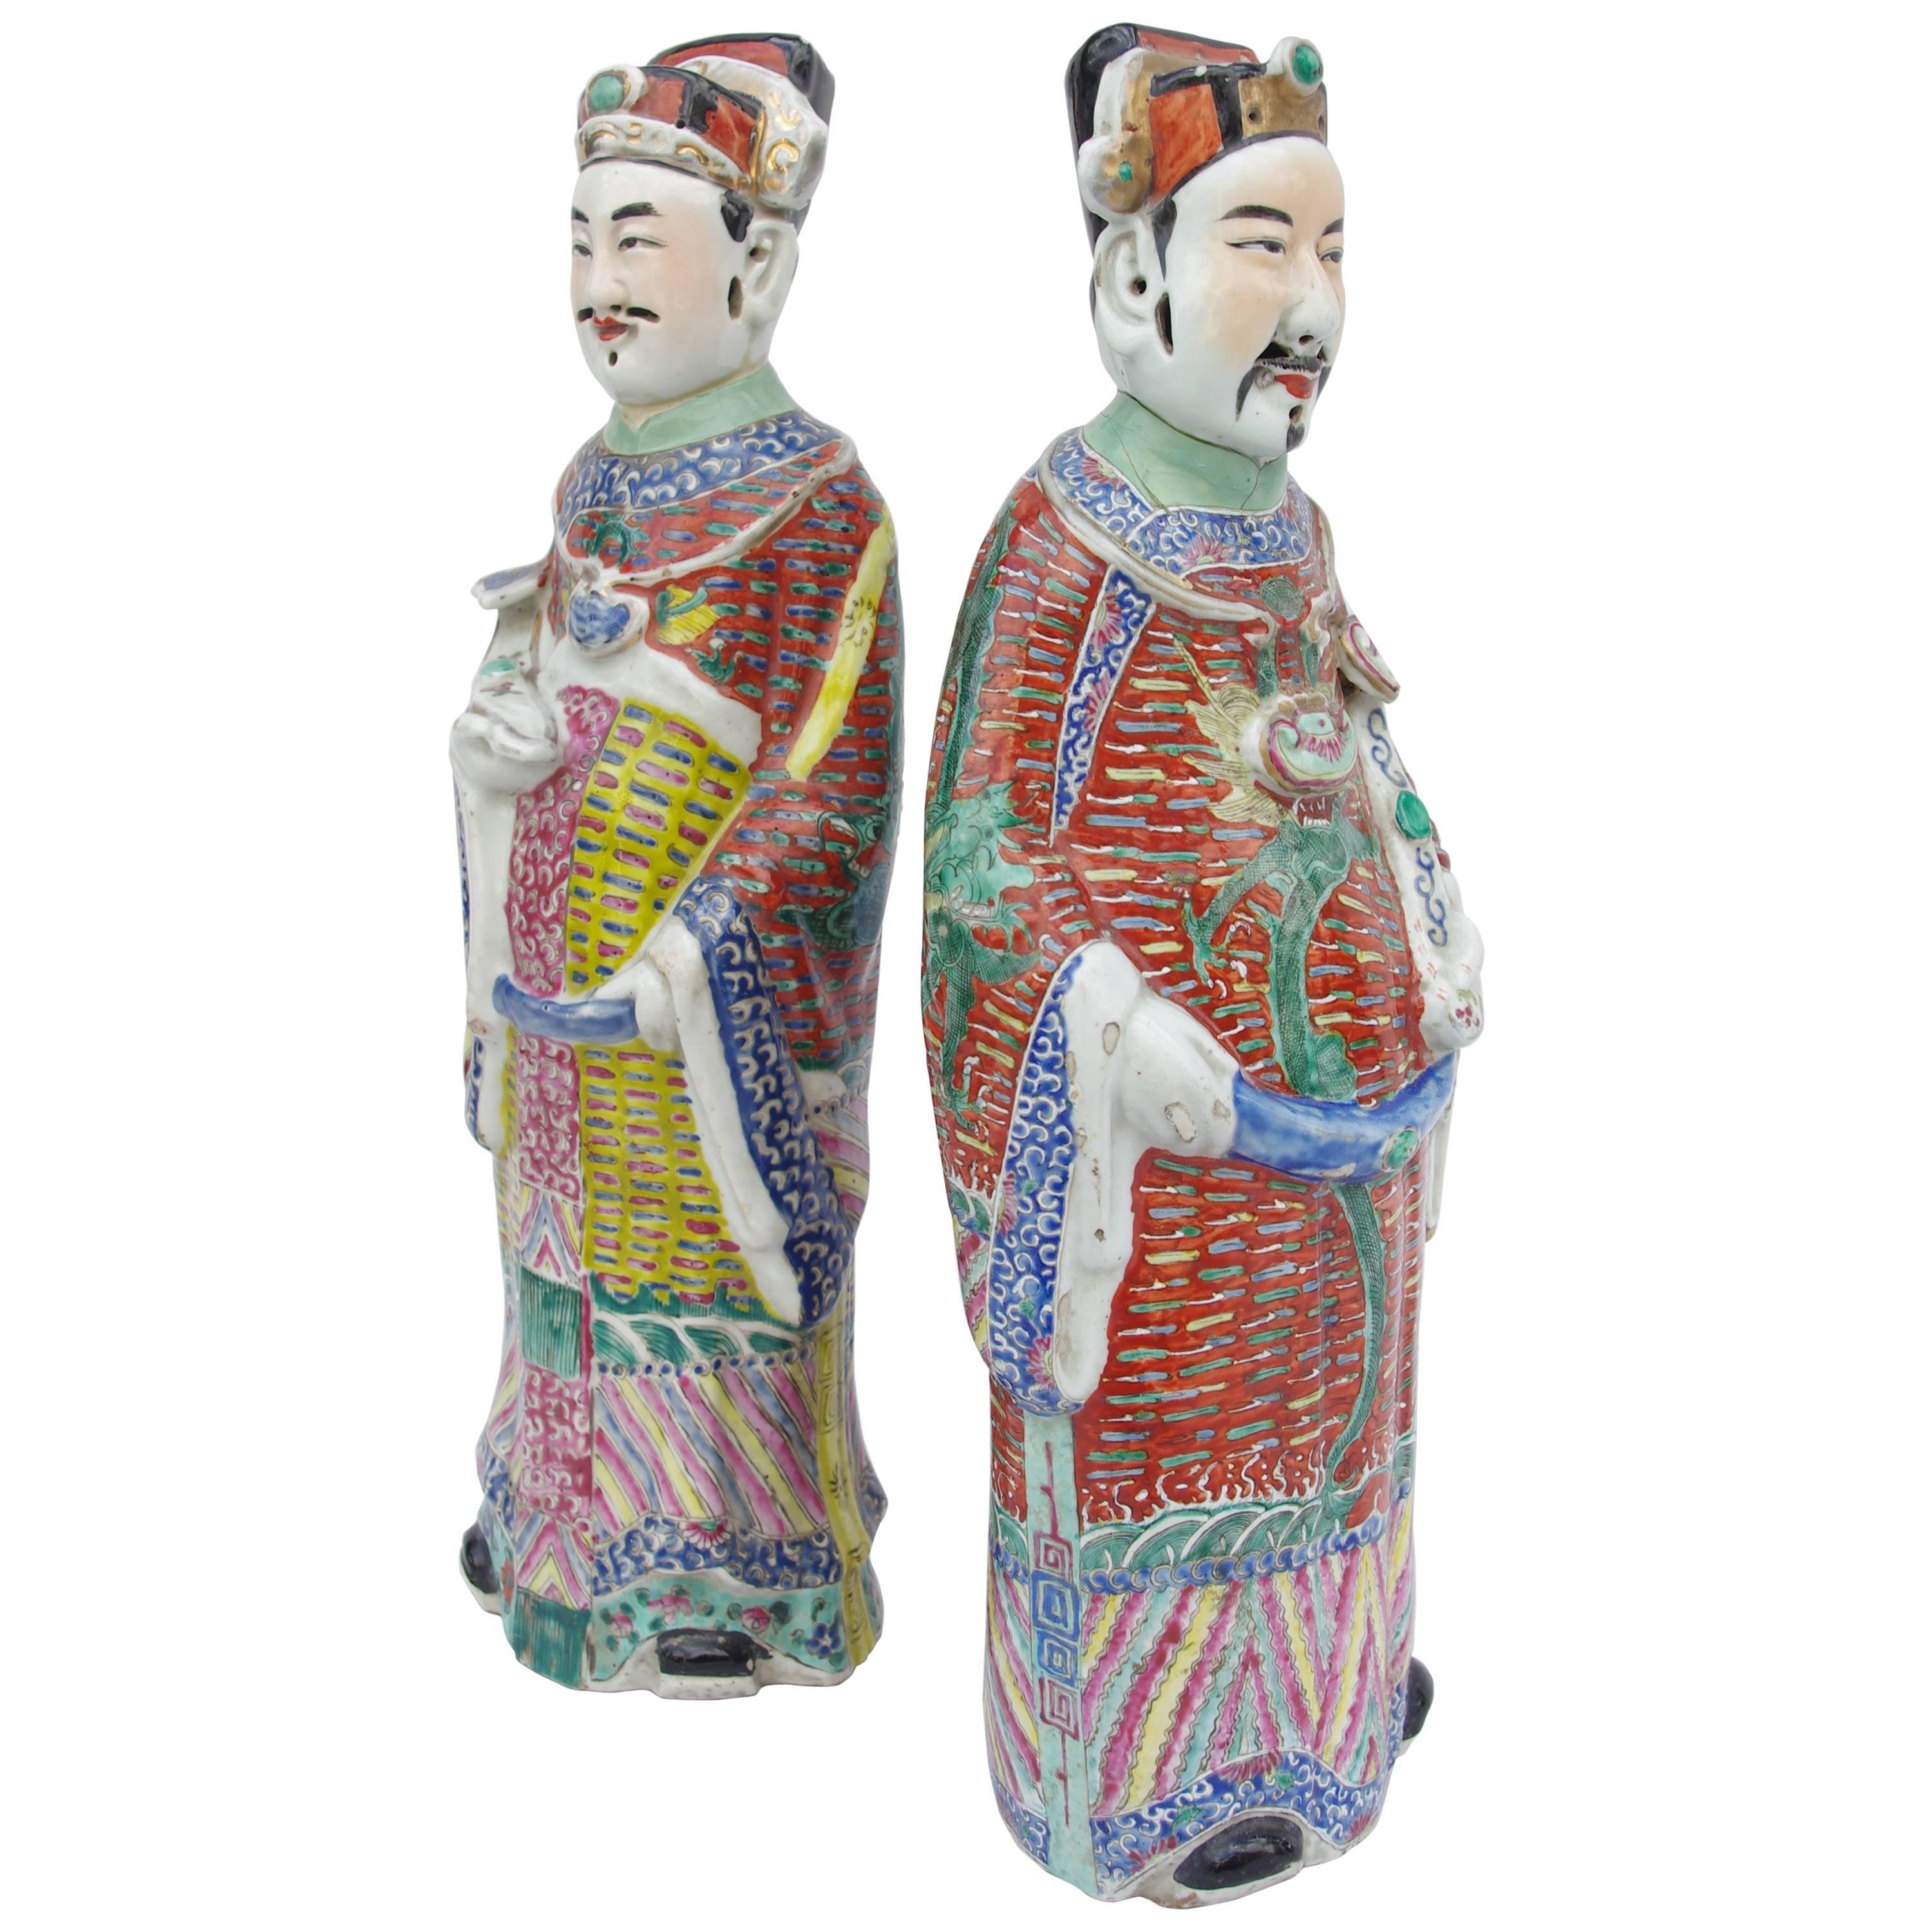 Pair of Chinese dignitaries in polychrome faience, 1900 period